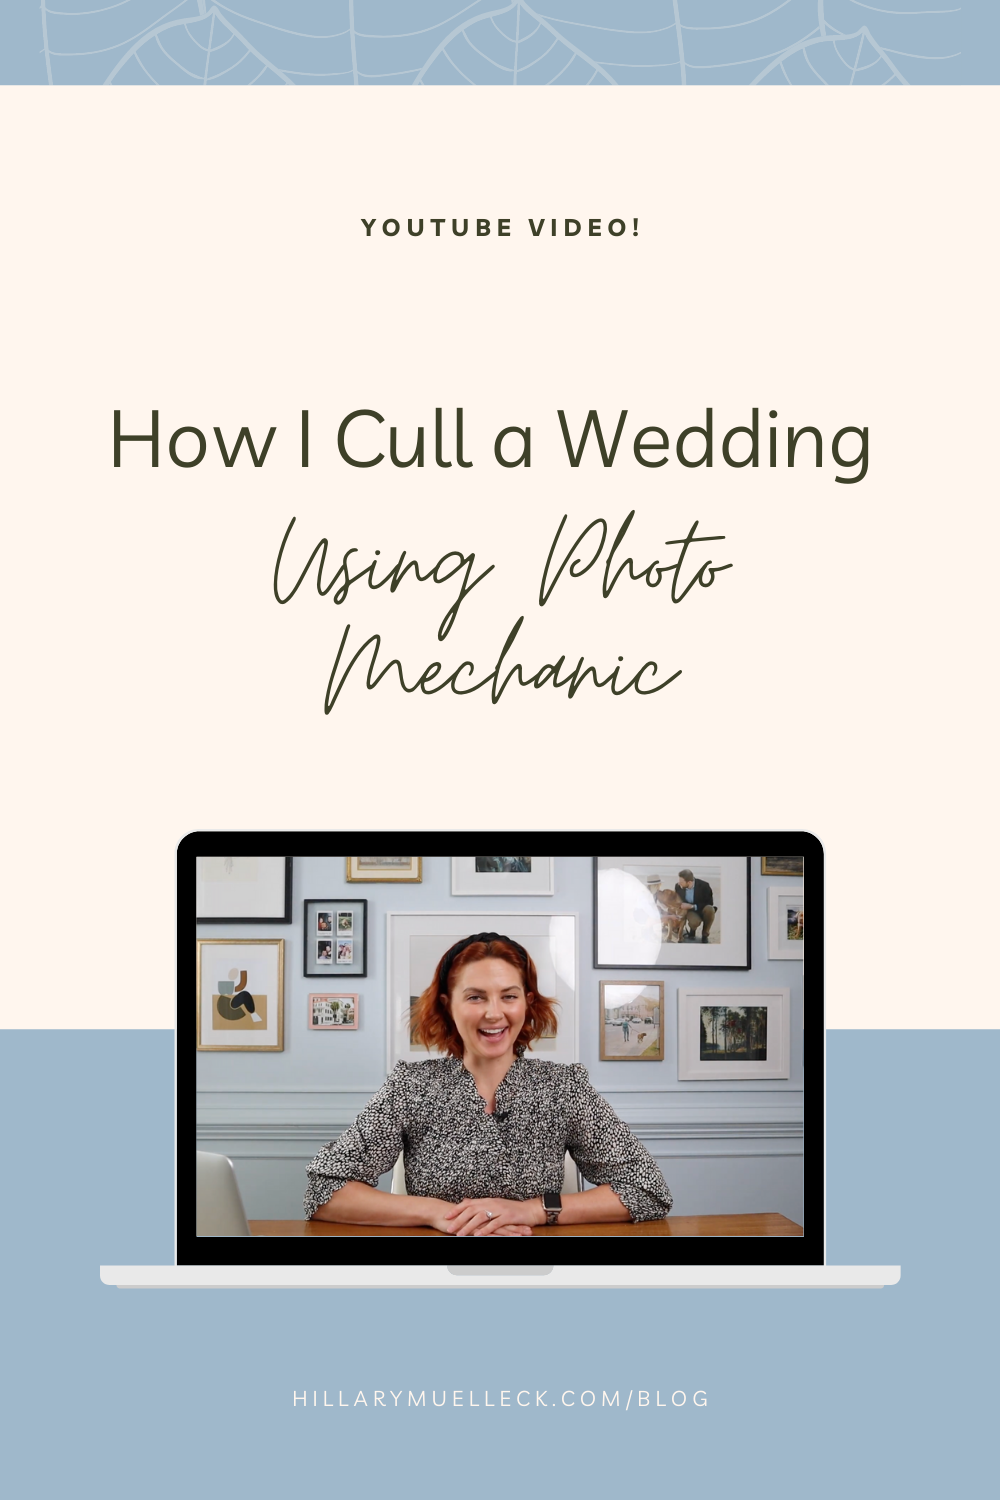 How I Cull a Wedding Using Photo Mechanic: editing workflow tips for wedding photographers from Hillary Muelleck, NC wedding photographer